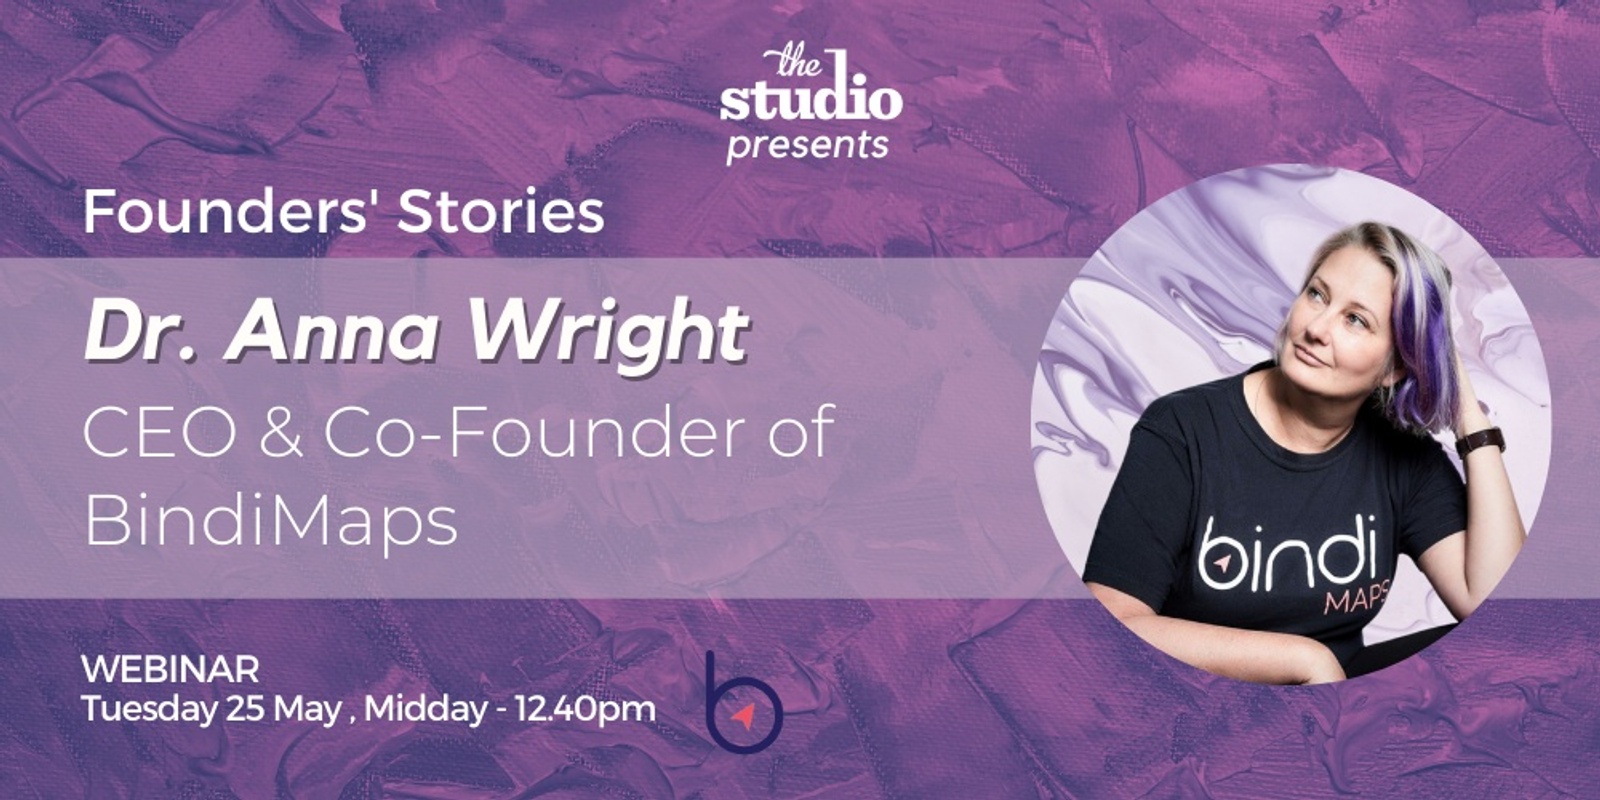 Banner image for Founders' Stories: Dr Anna Wright, Founder of BindiMaps